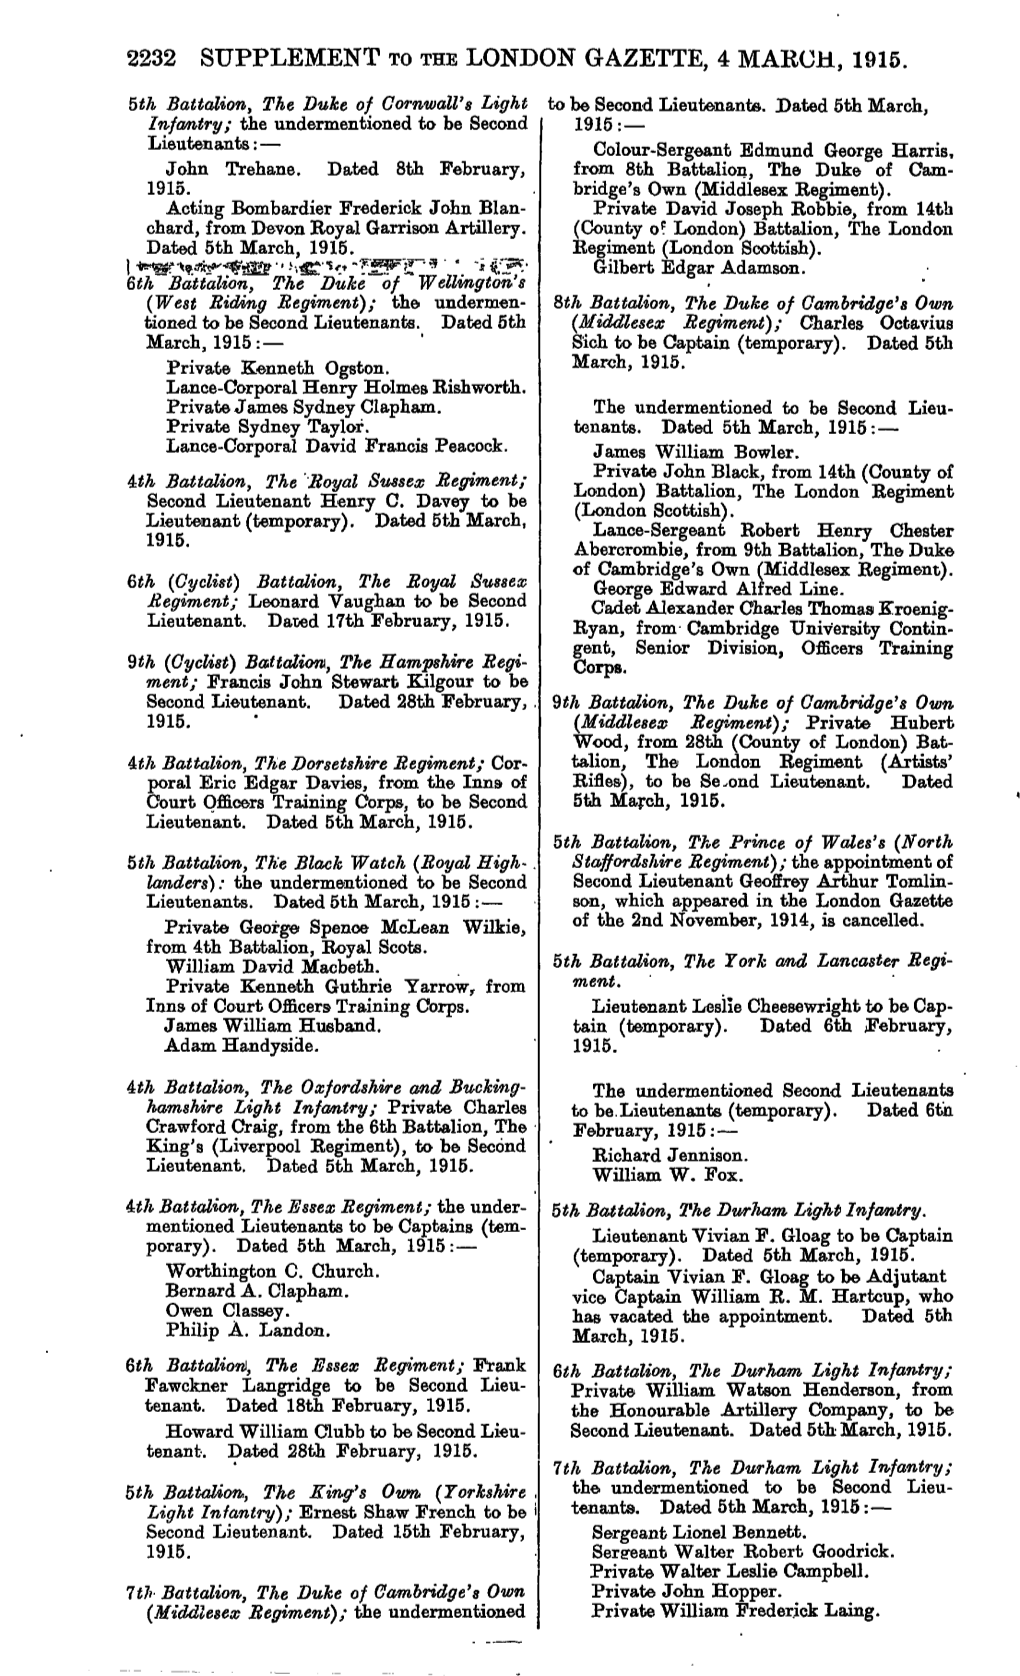 2232 Supplement to the London Gazette, 4 March, 1915